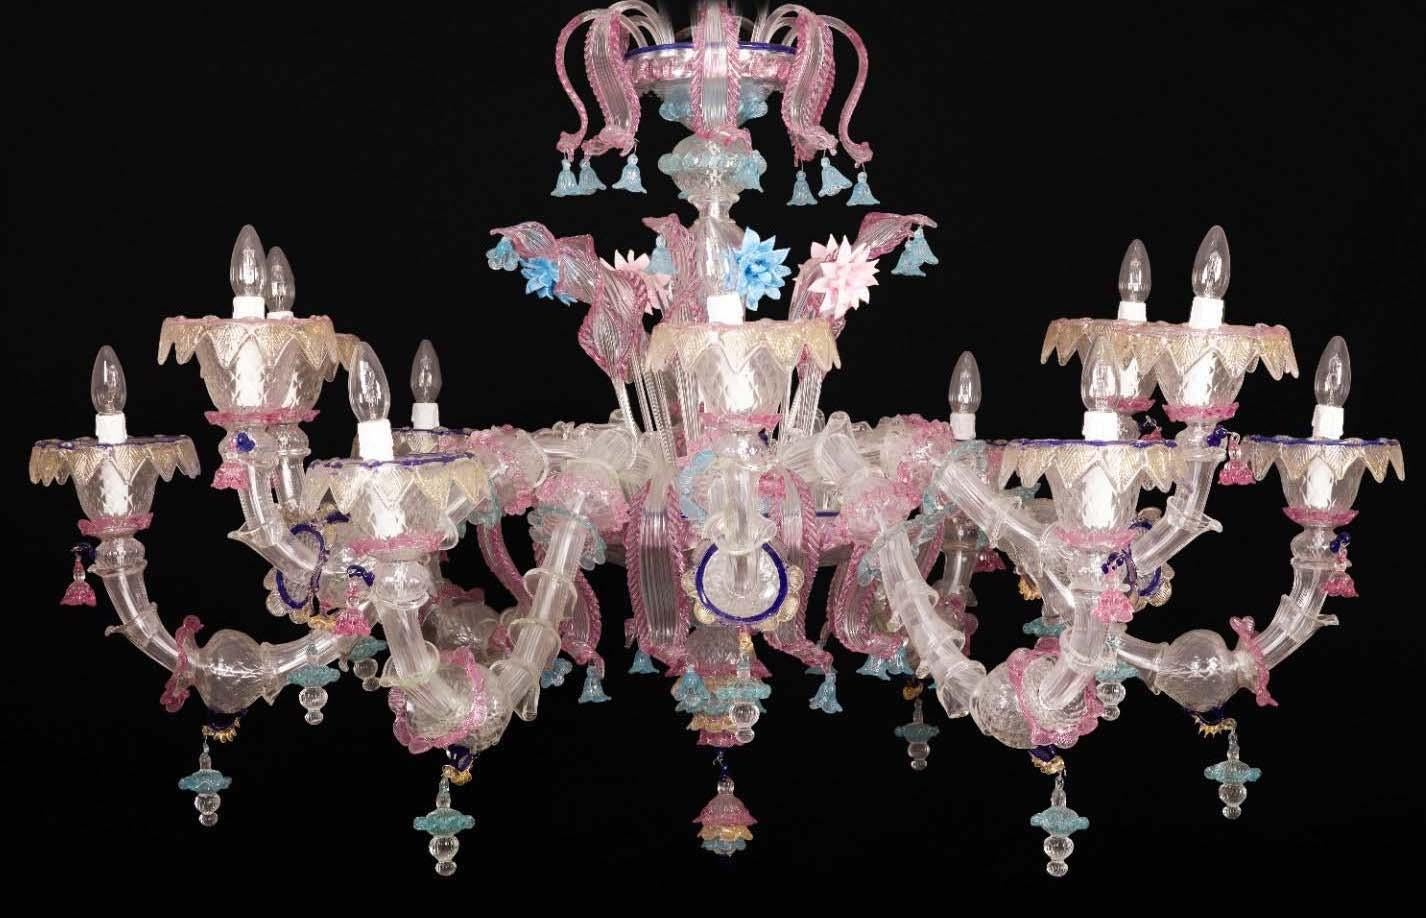 Beautiful Murano chandelier with 18 arms and a multitude of pink and heavenly flowers in glass paste and gold inclusion, creating a magic light effect.
Available also a pair.
18 E14 light bulbs. We can wire for your country standards.
  